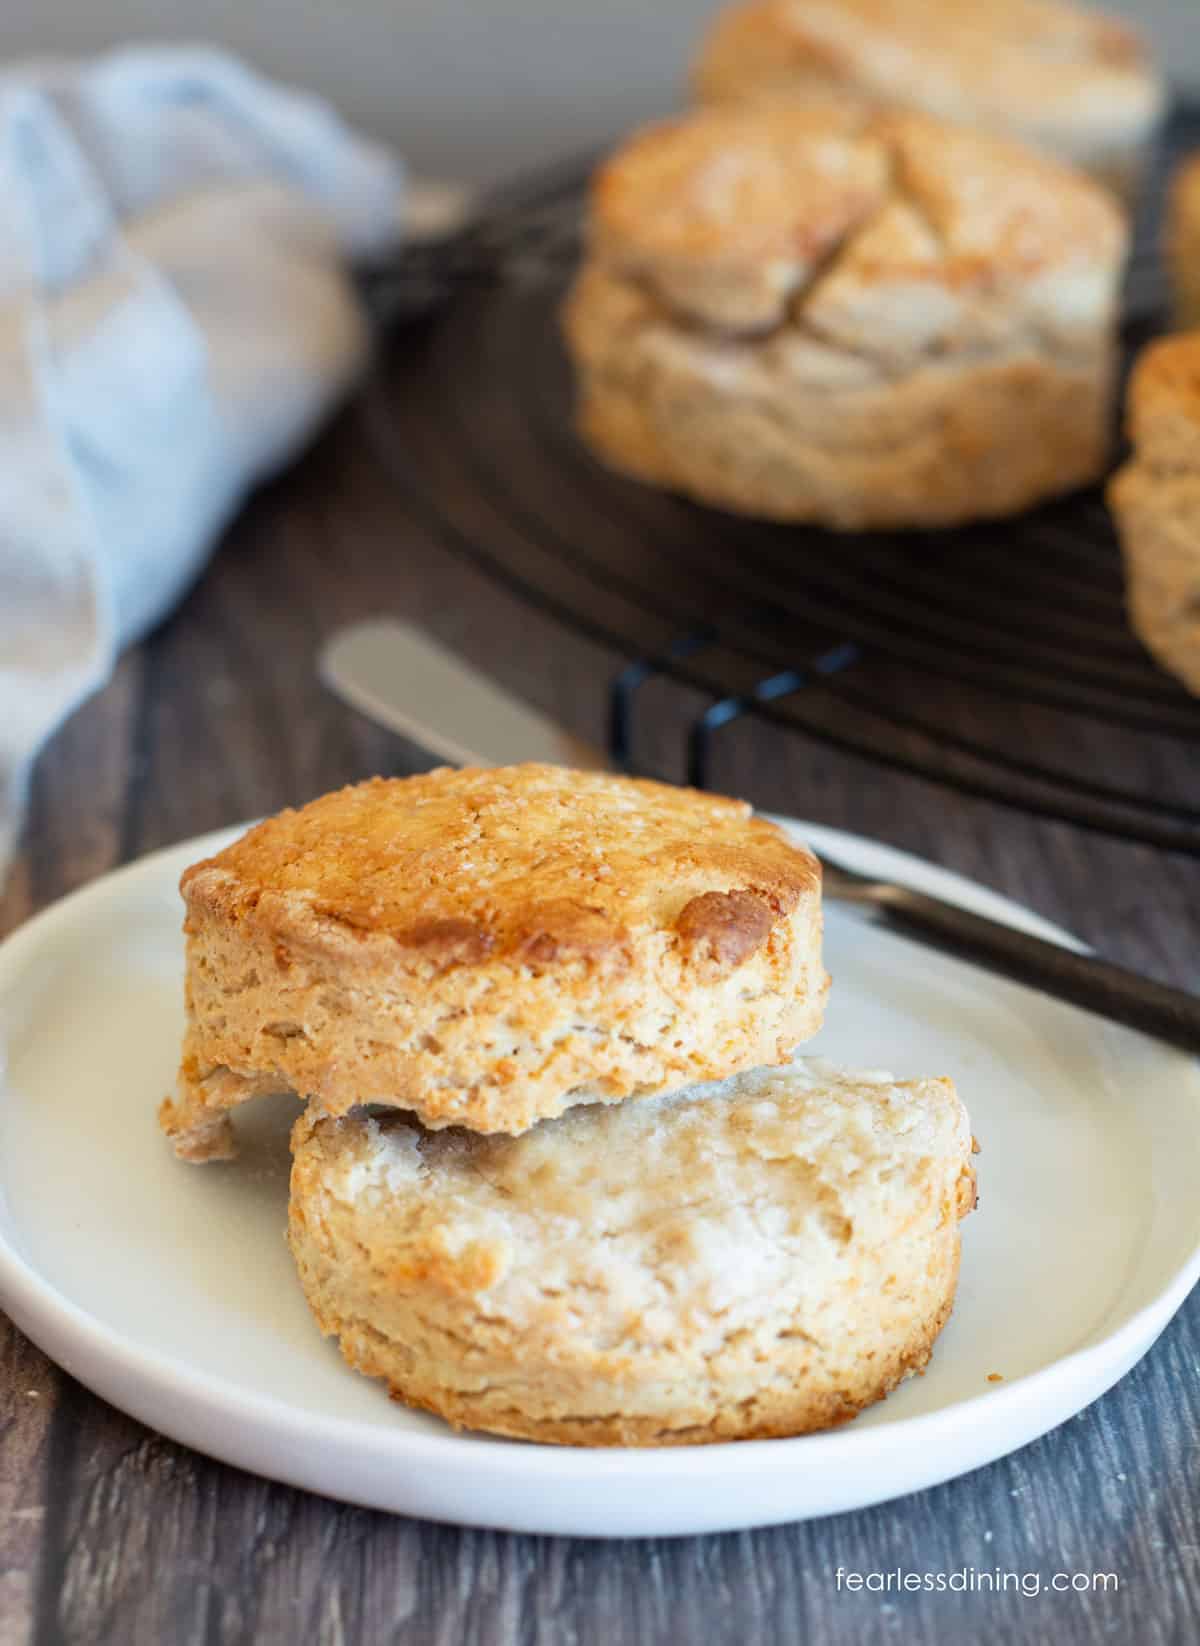 A biscuit cut in half on a small white plate.